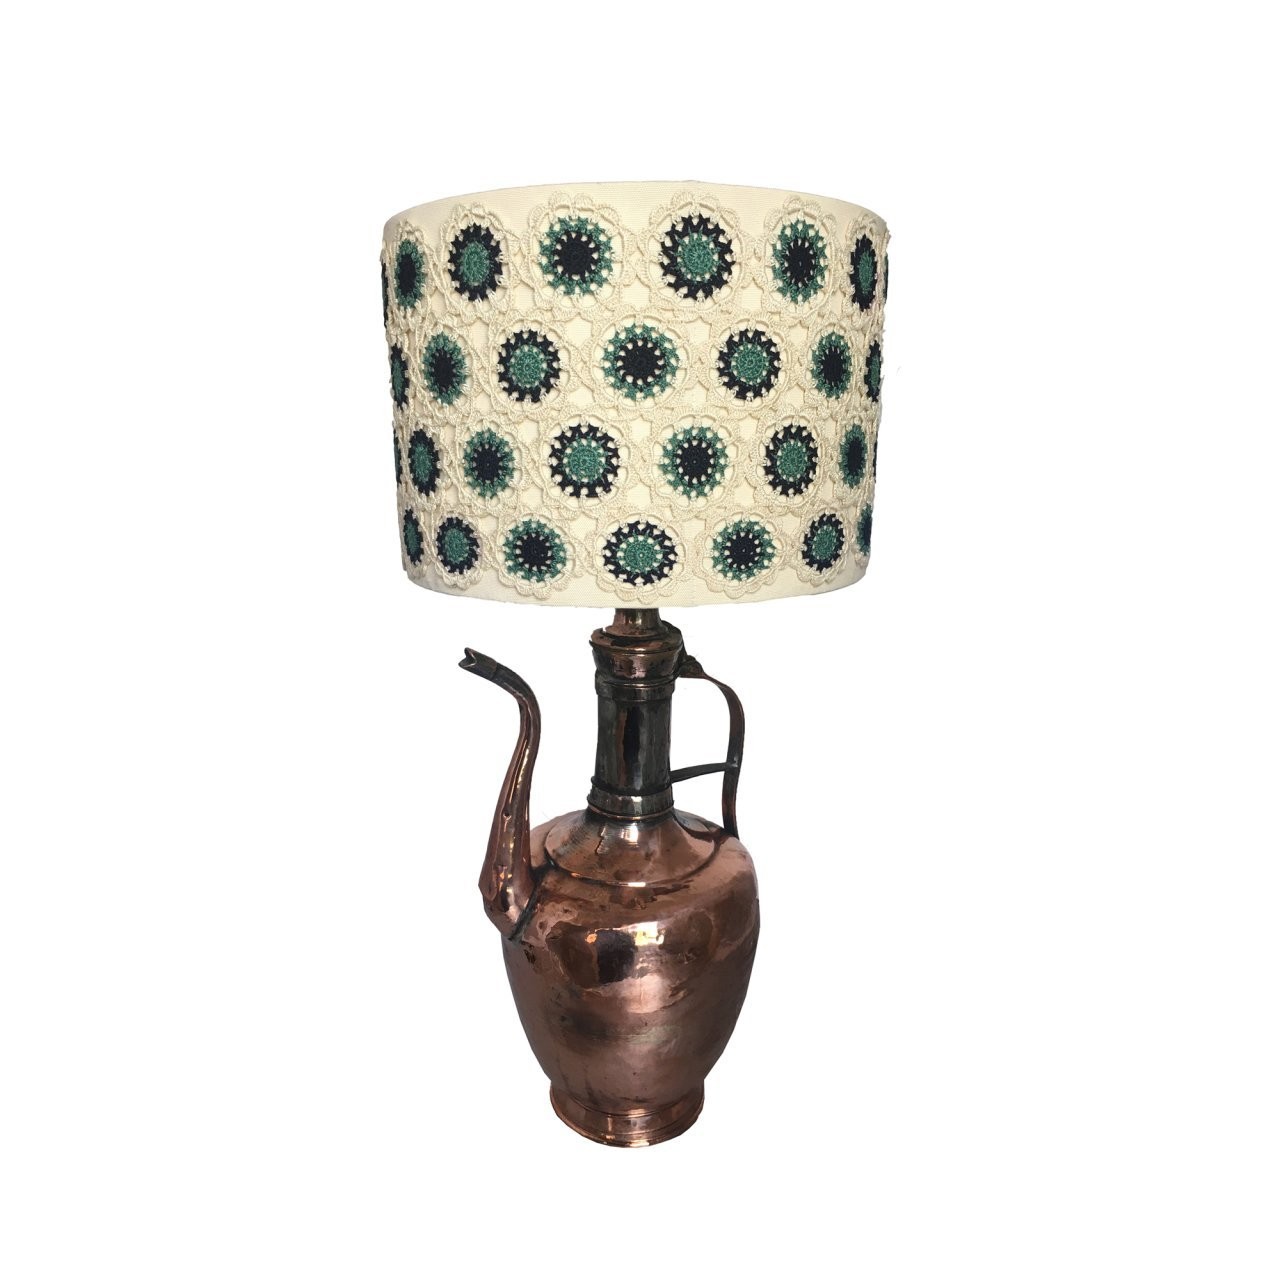 Copper Pitcher Lampshade 100% handmade.Limited Edition